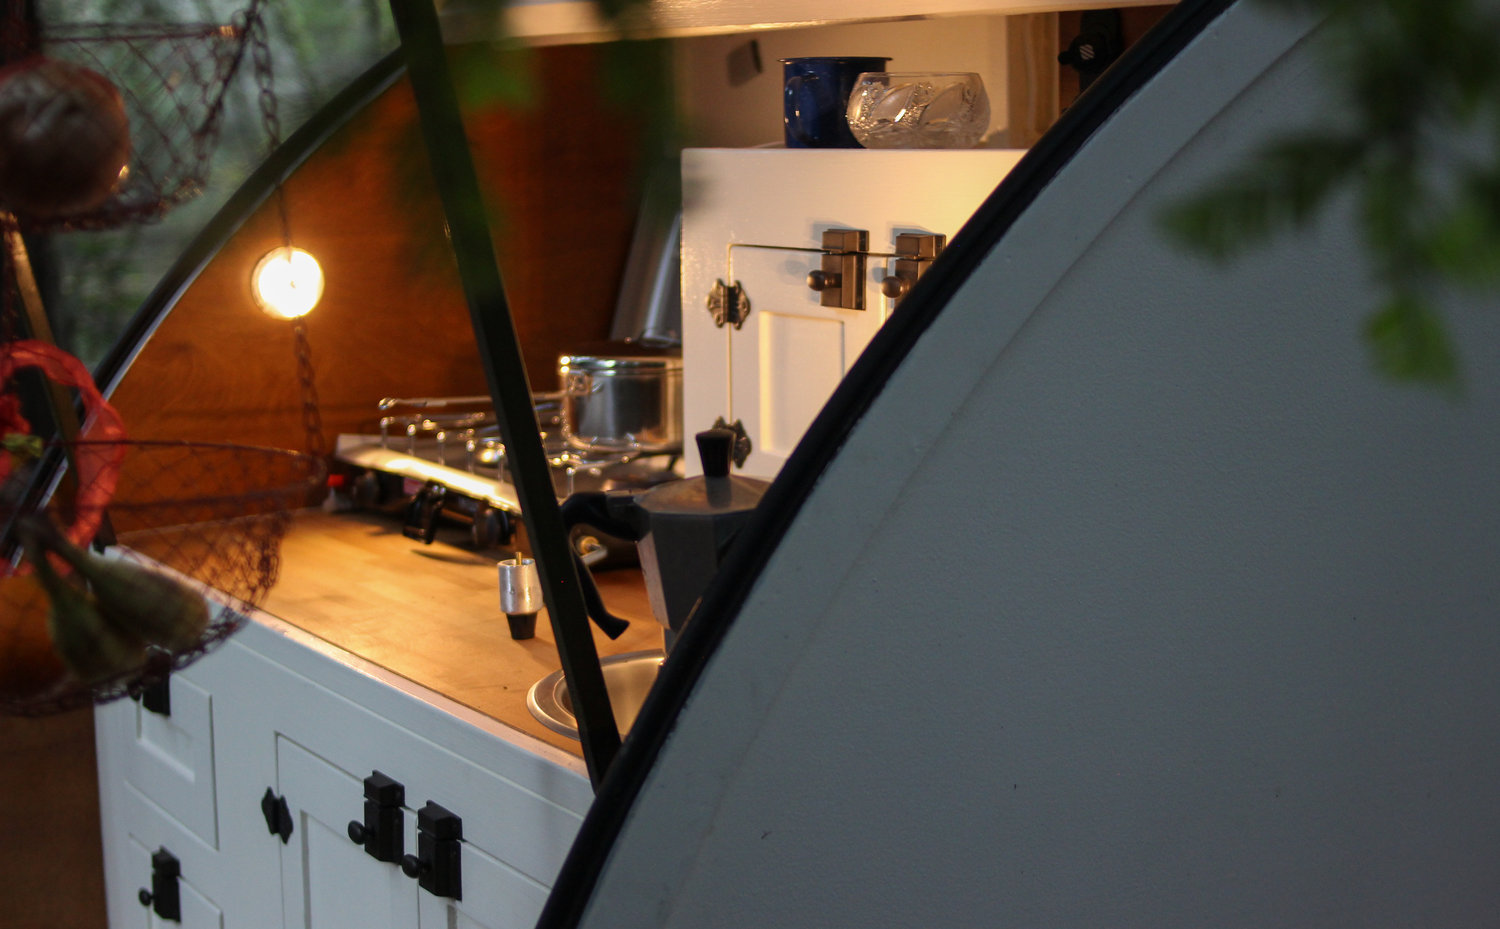 Get On An Adventure With This Vintage Teardrop Trailer! 6